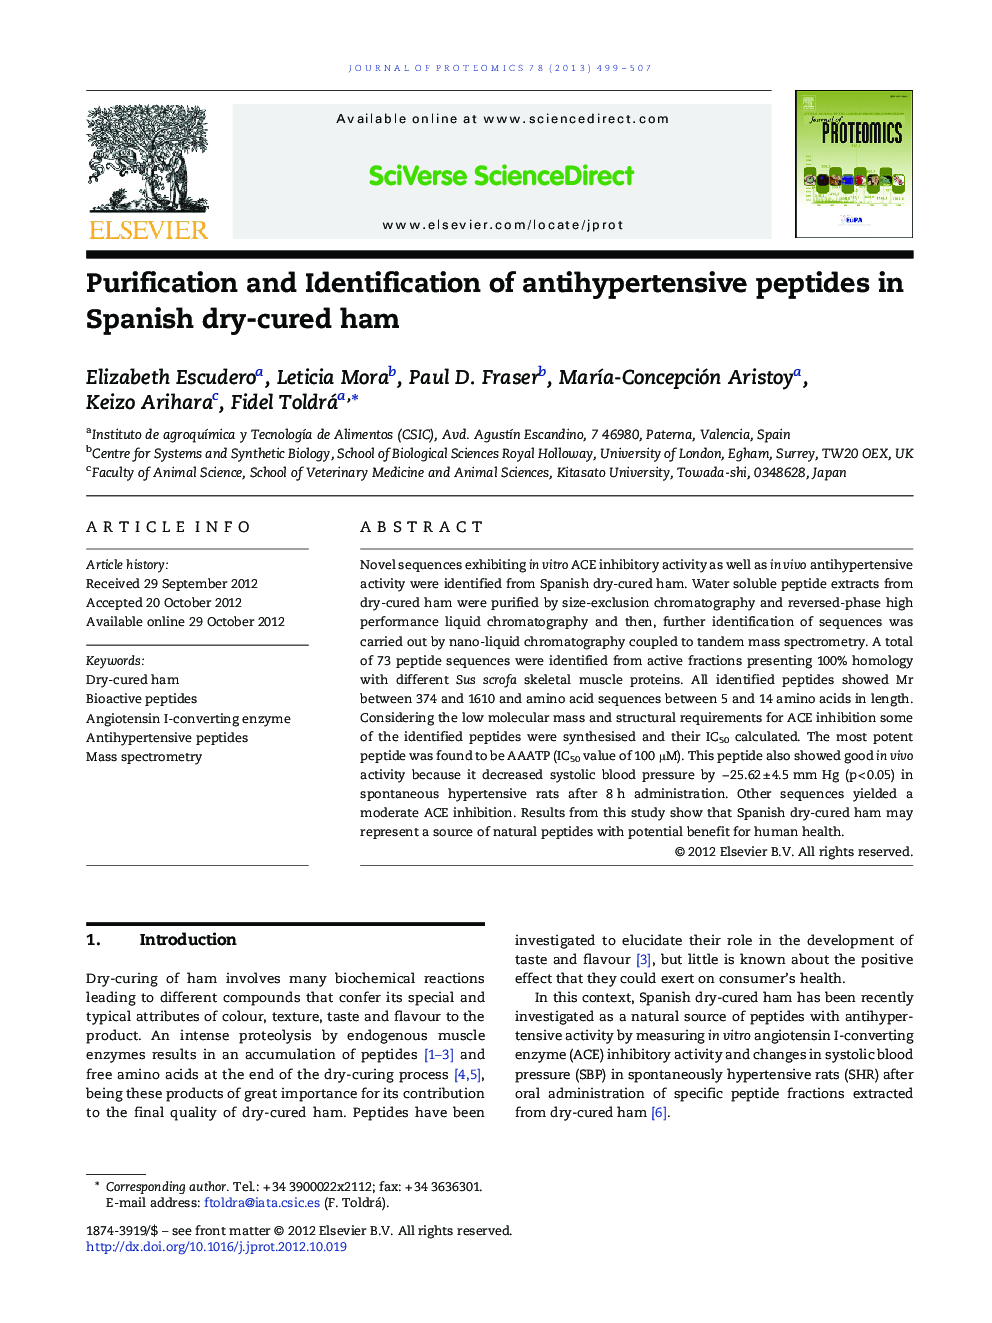 Purification and Identification of antihypertensive peptides in Spanish dry-cured ham